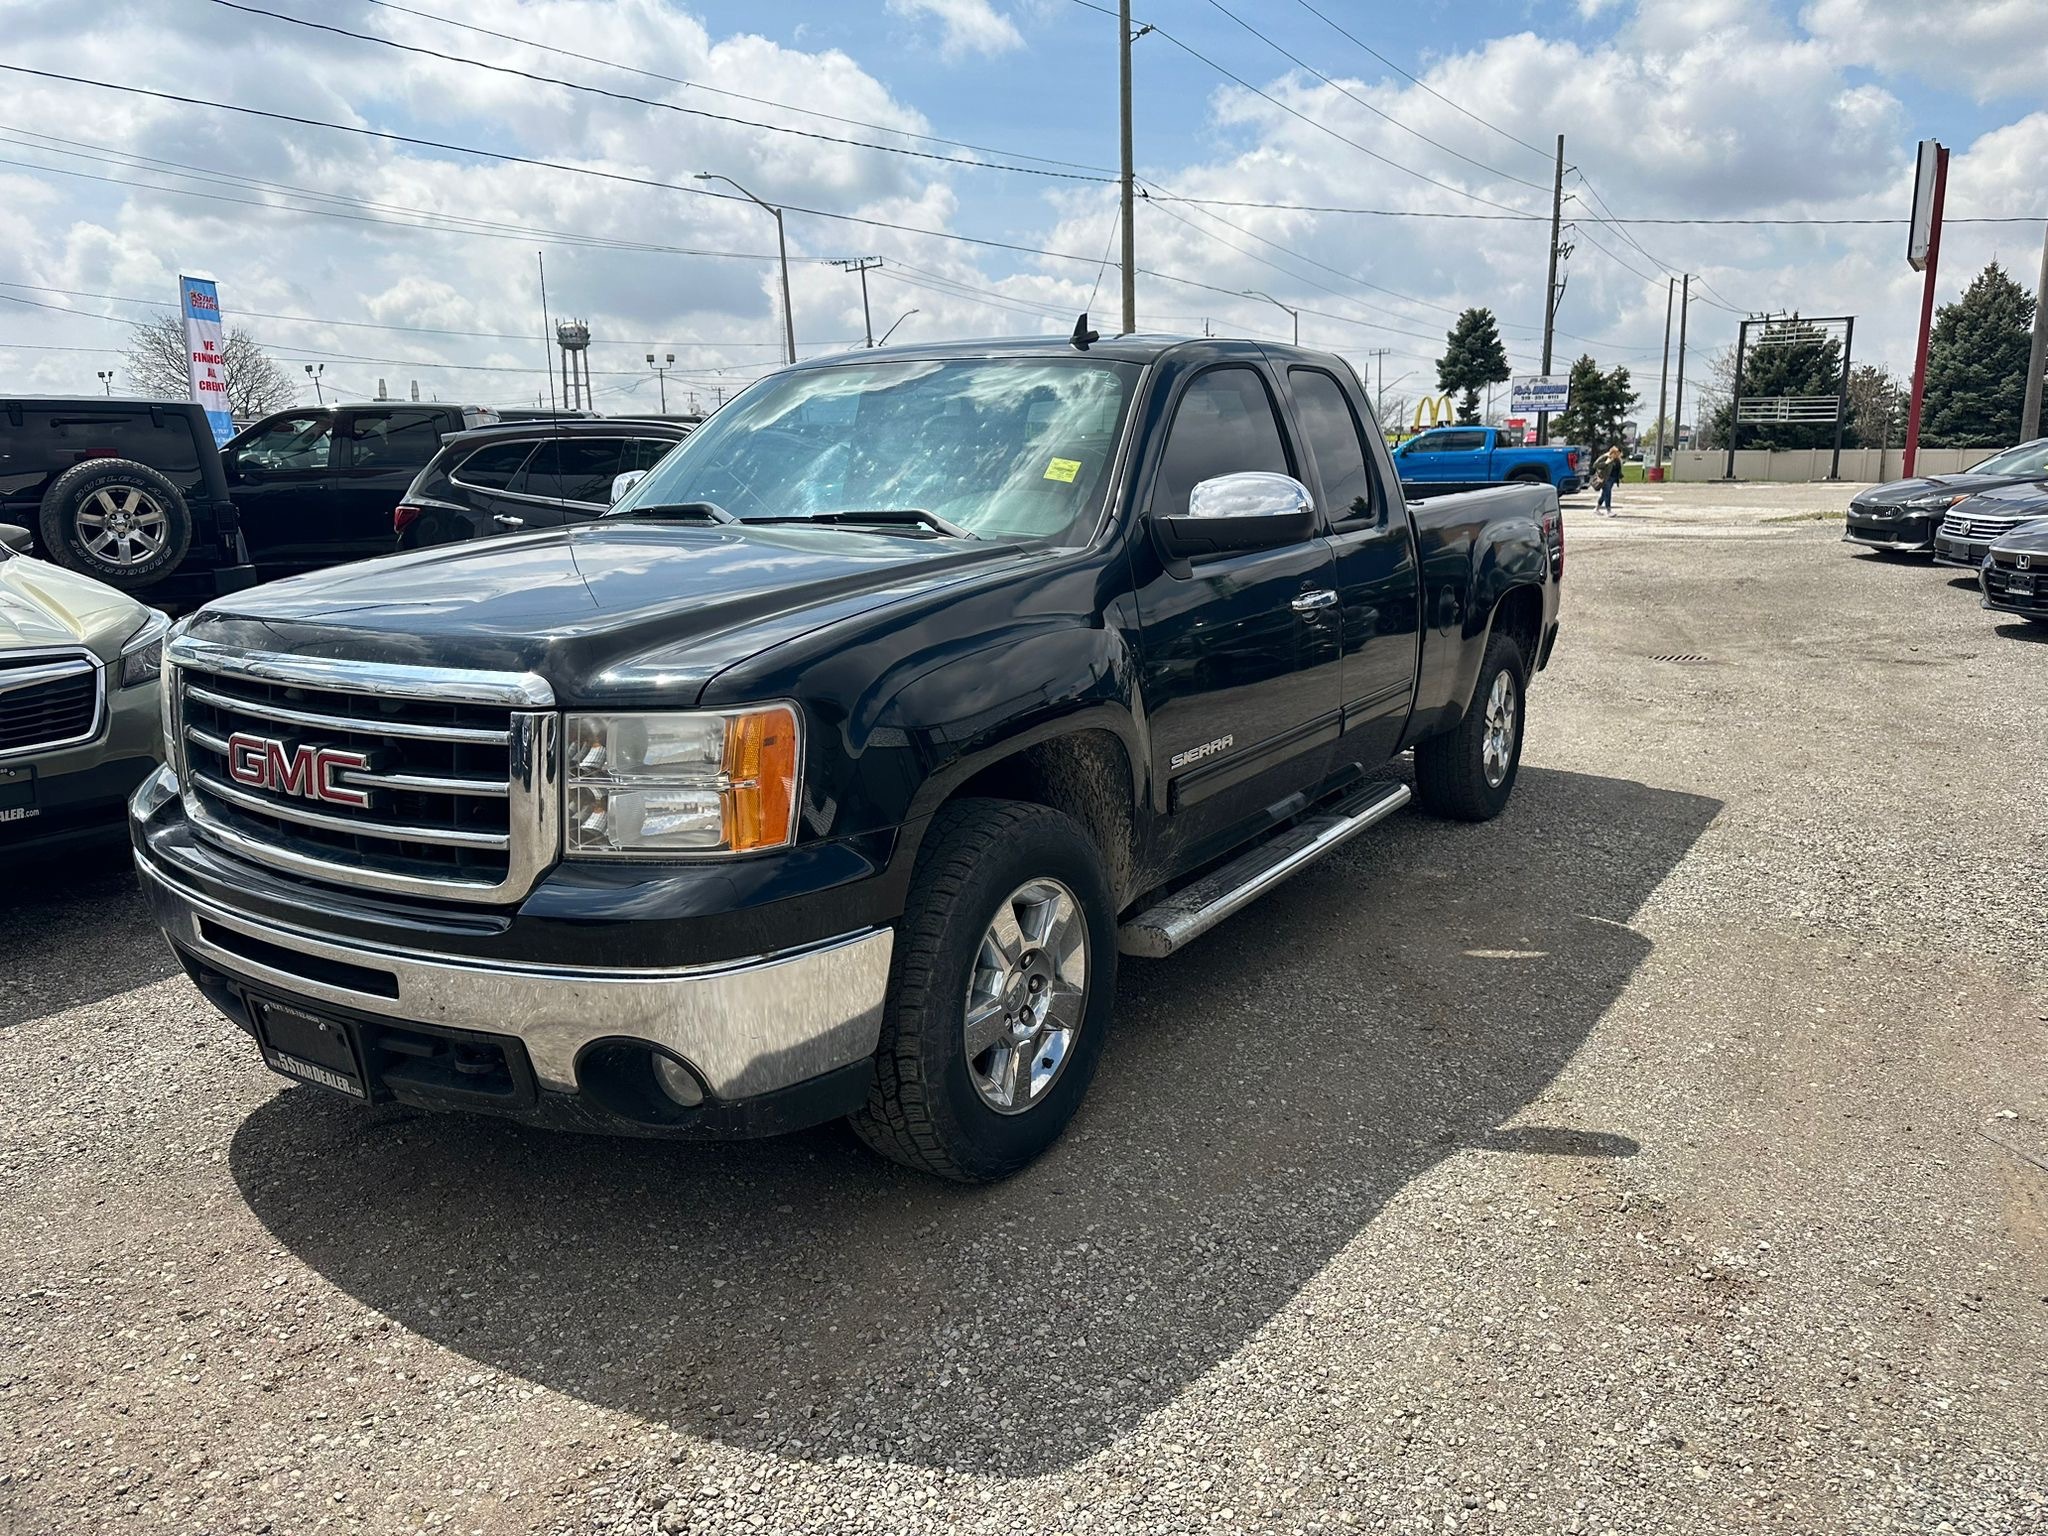 2012 GMC Sierra 1500 GREAT CONDITION! MUST SEE! WE FINANCE ALL CREDIT!